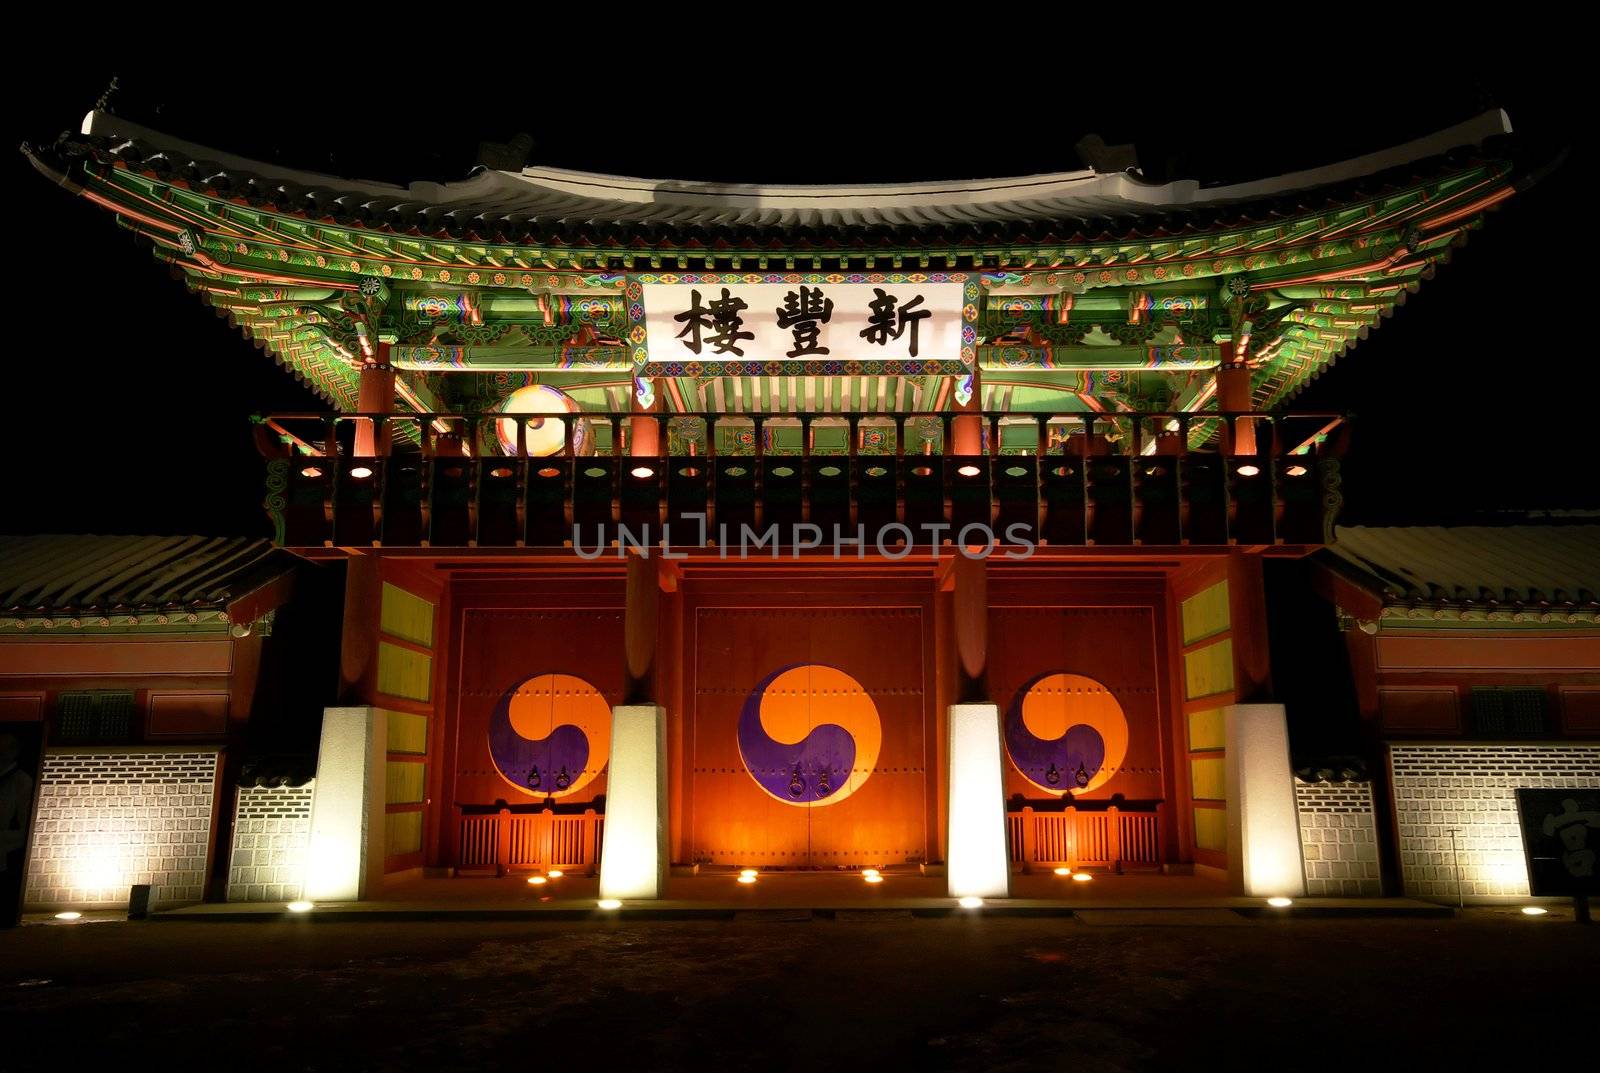 Korean Traditional Gate at Night by clickbeetle